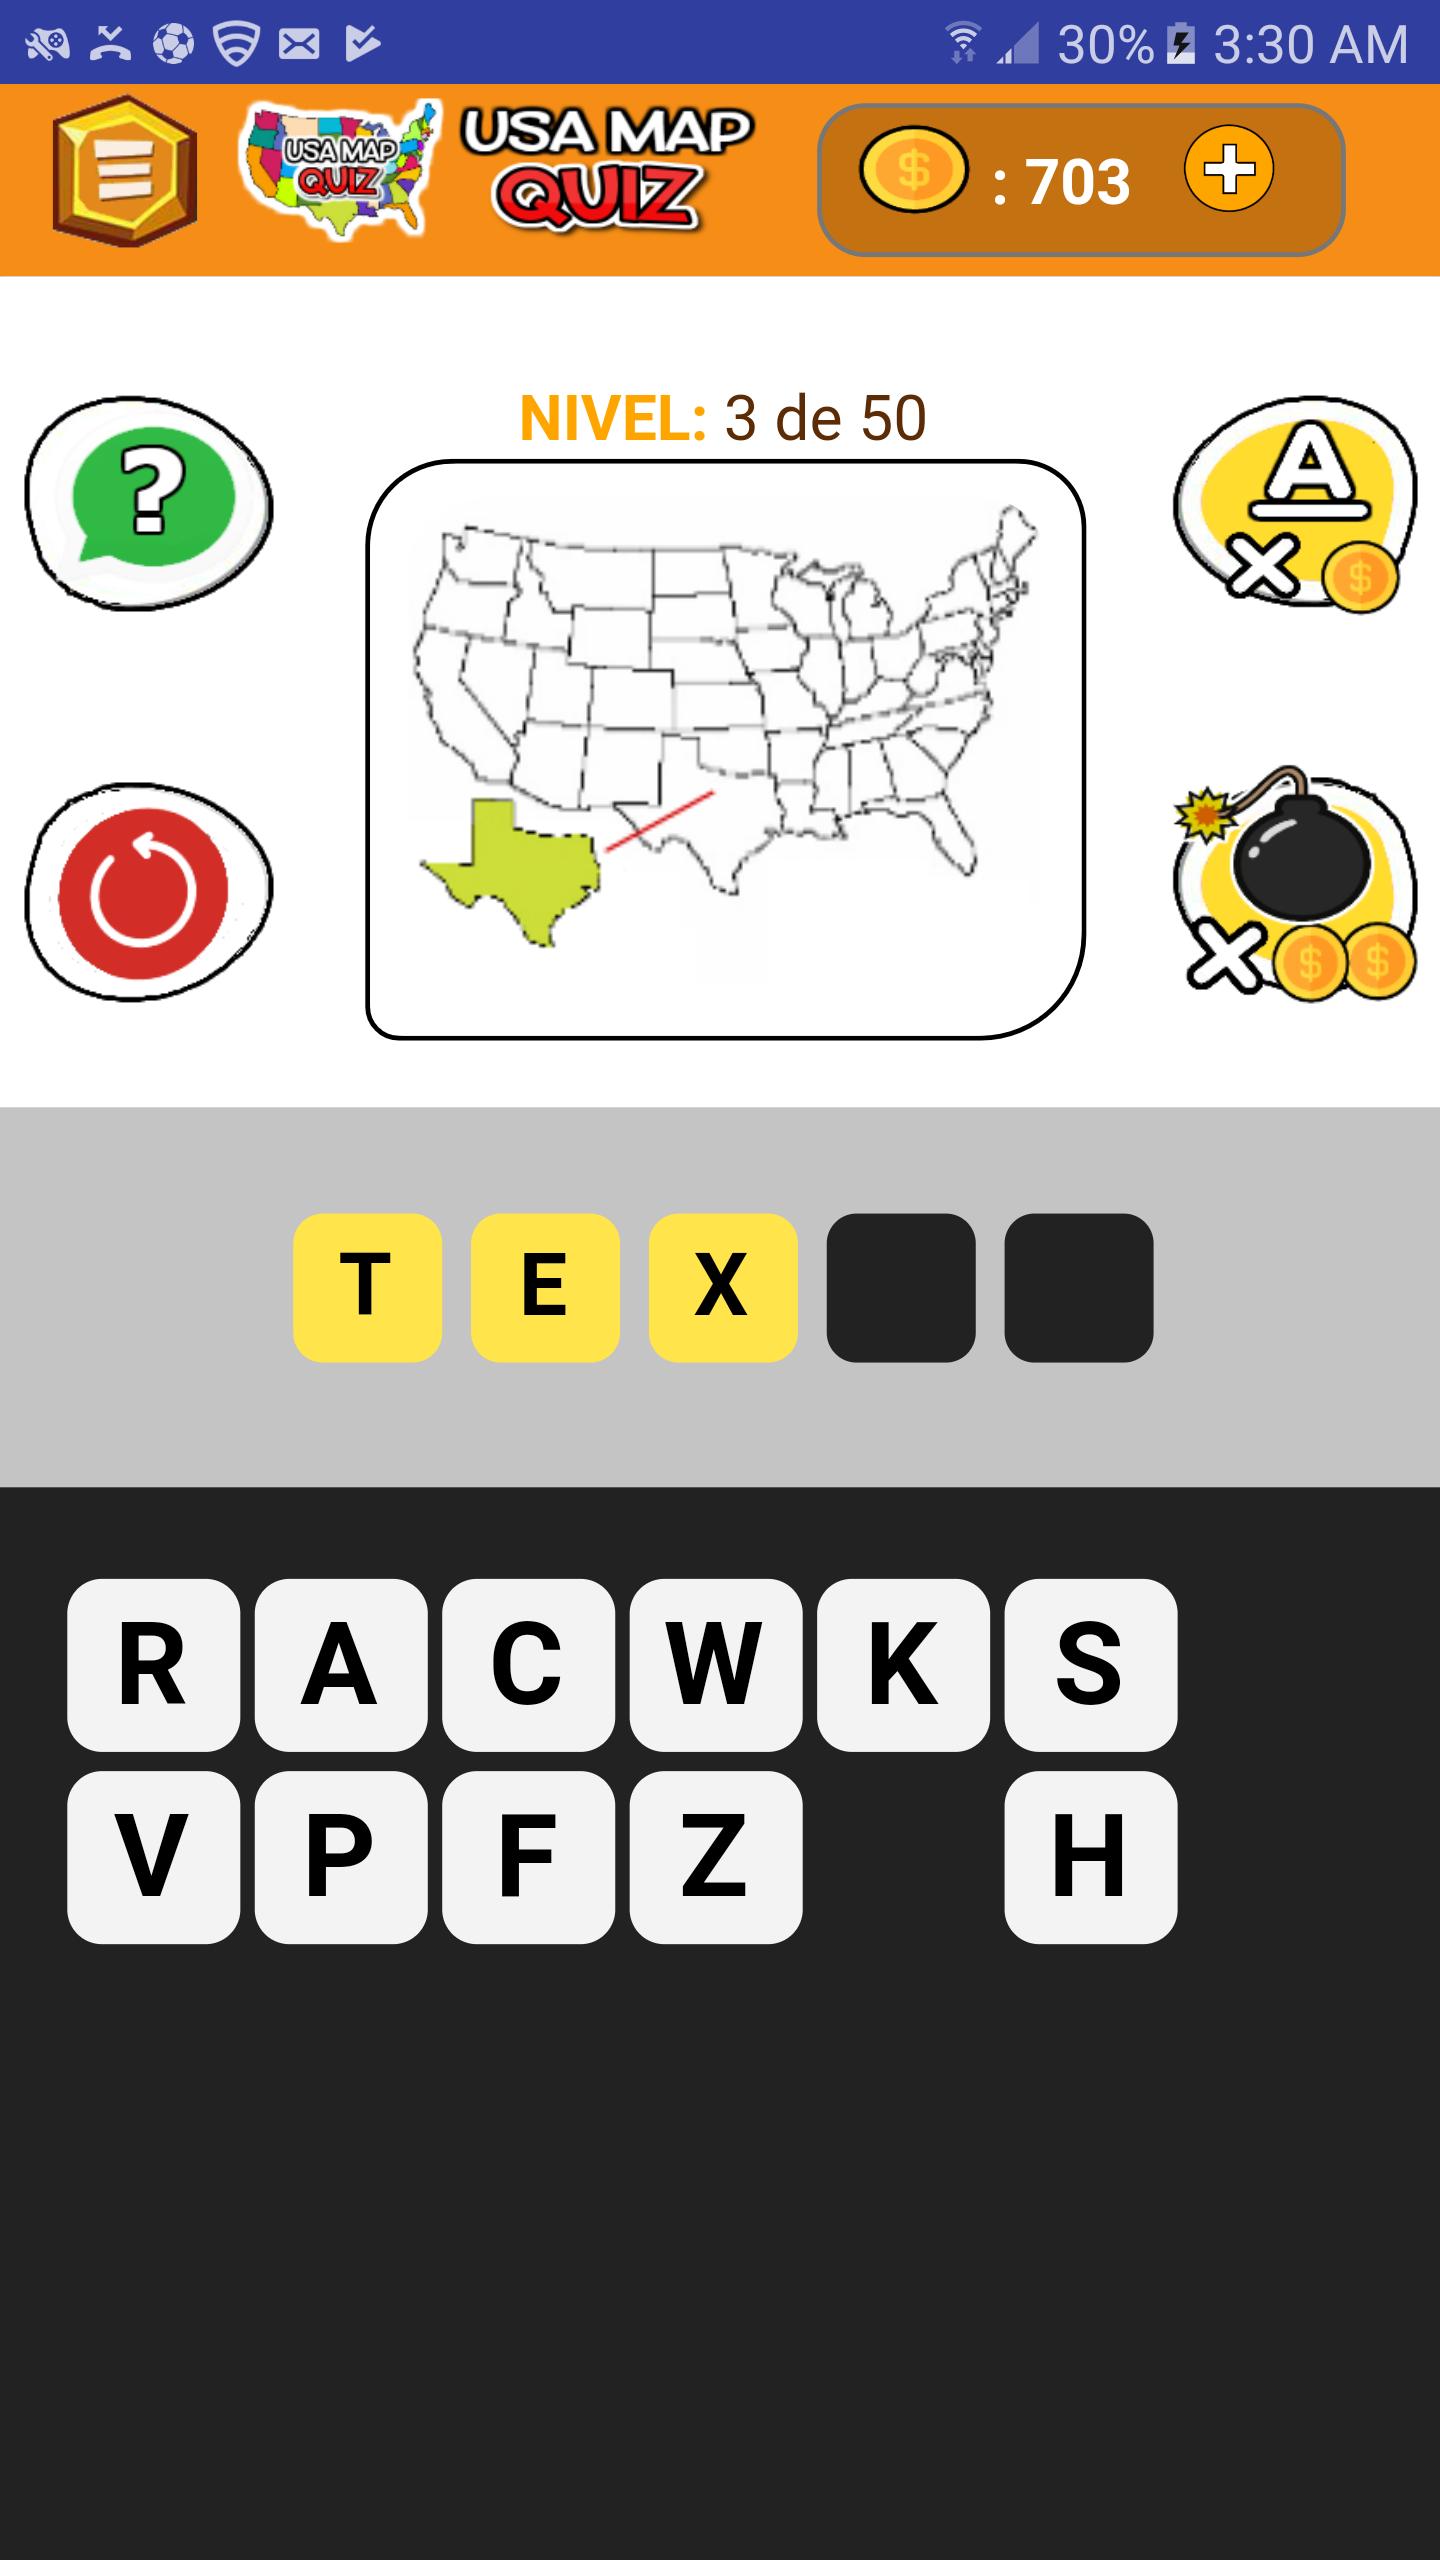 USA MAP QUIZ Guess The US State Game for Android - APK Download